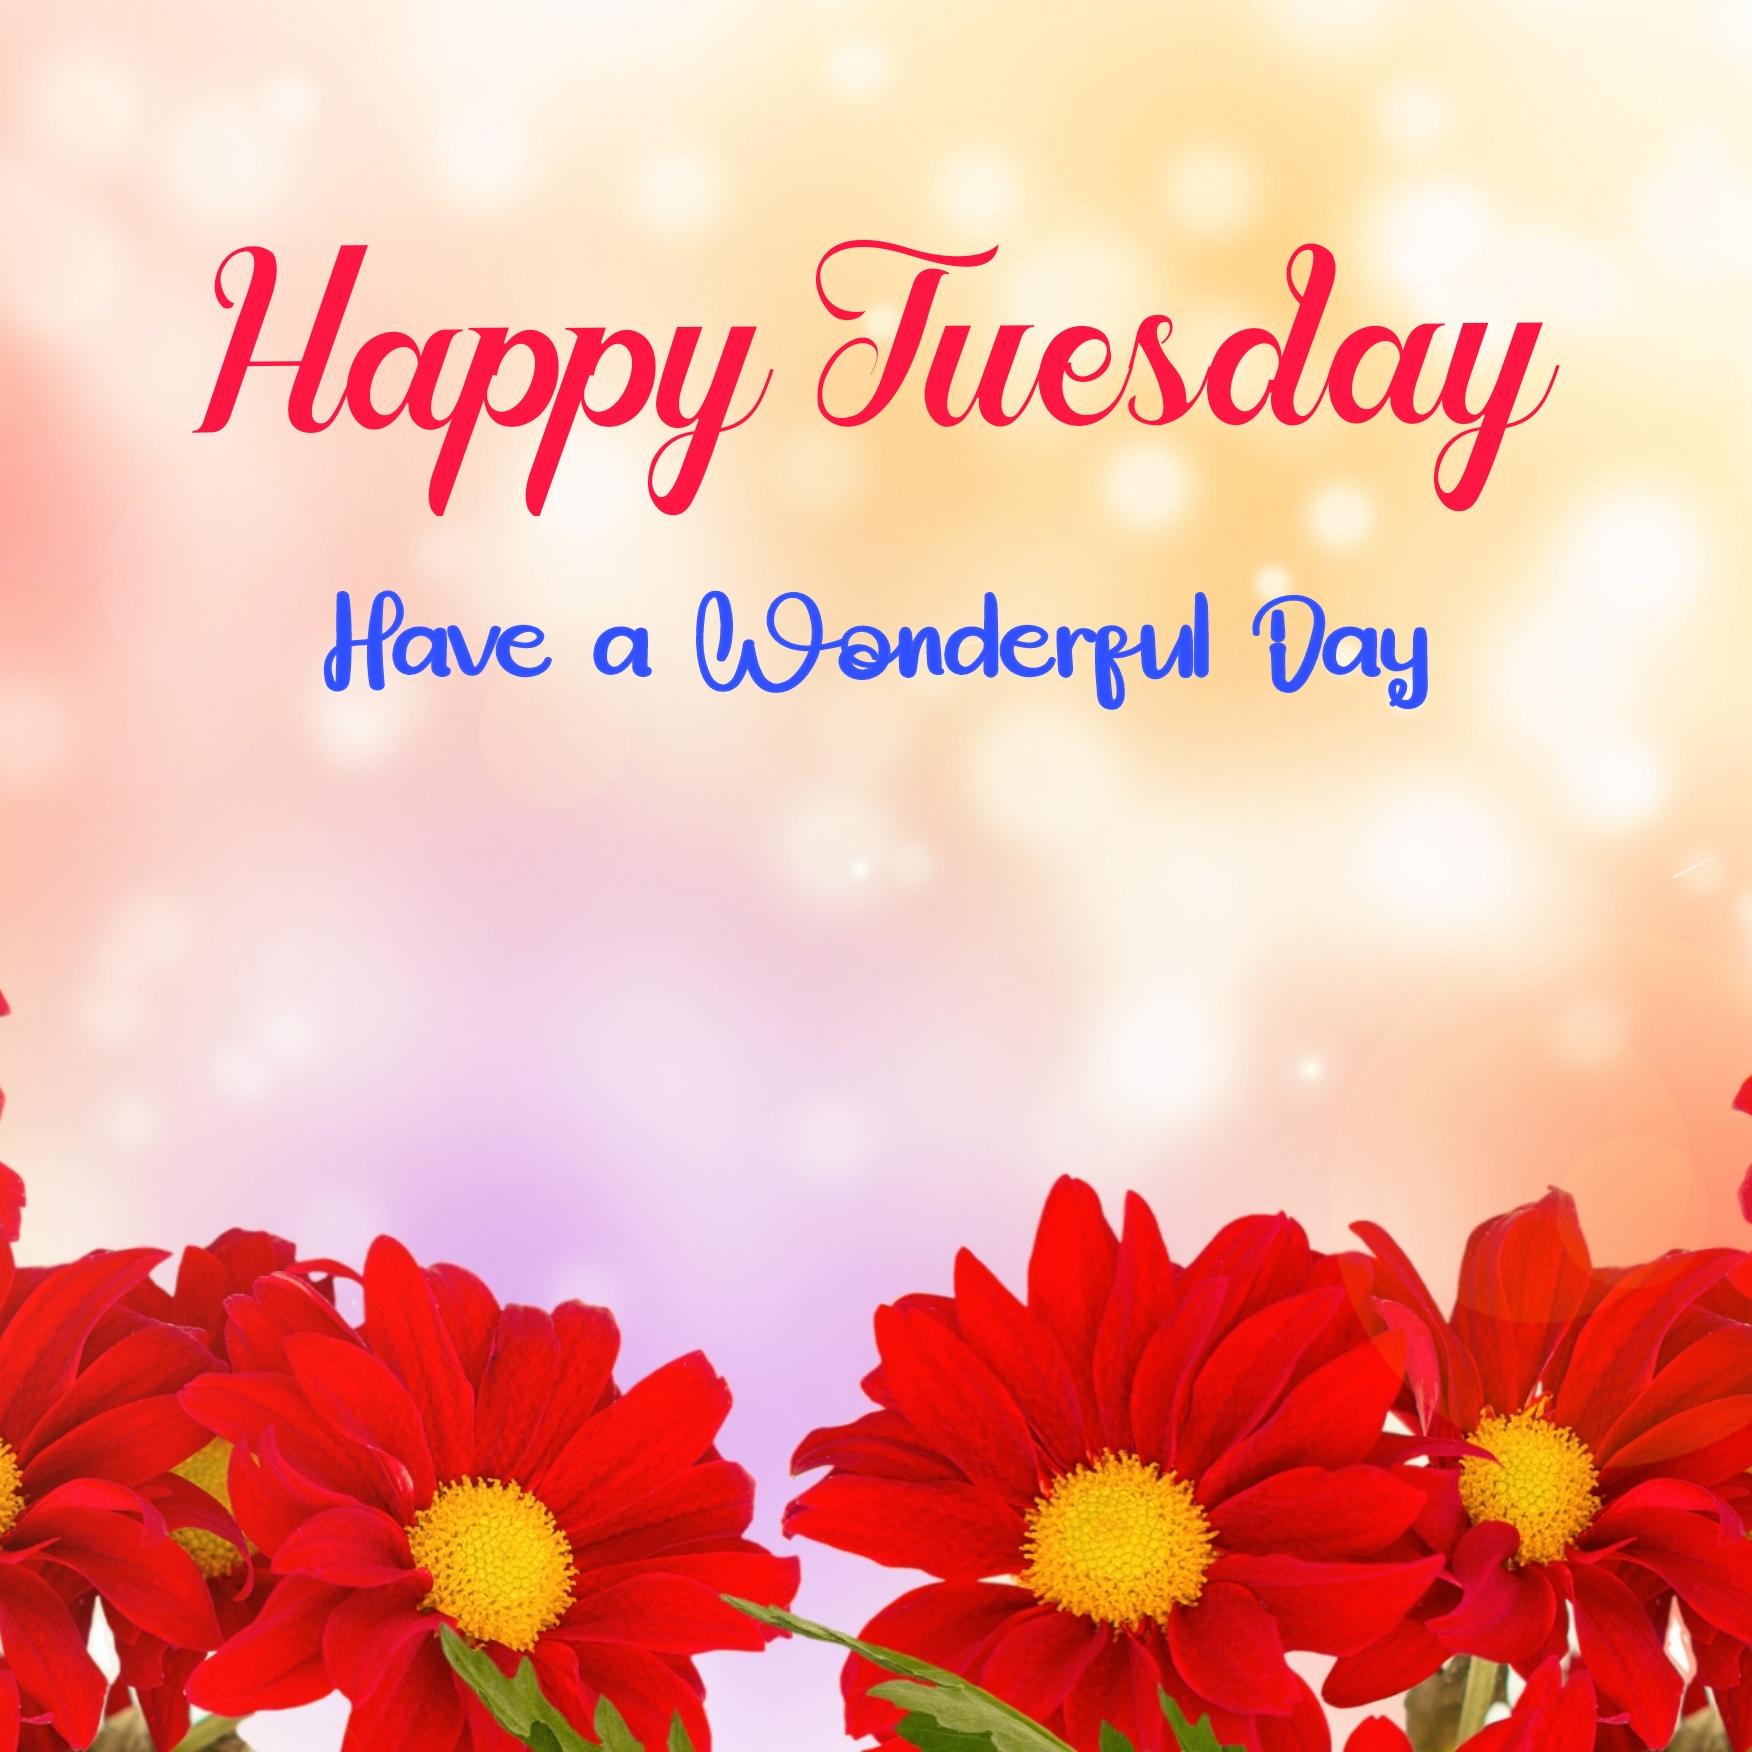 Happy Tuesday Have A Wonderful Day Images